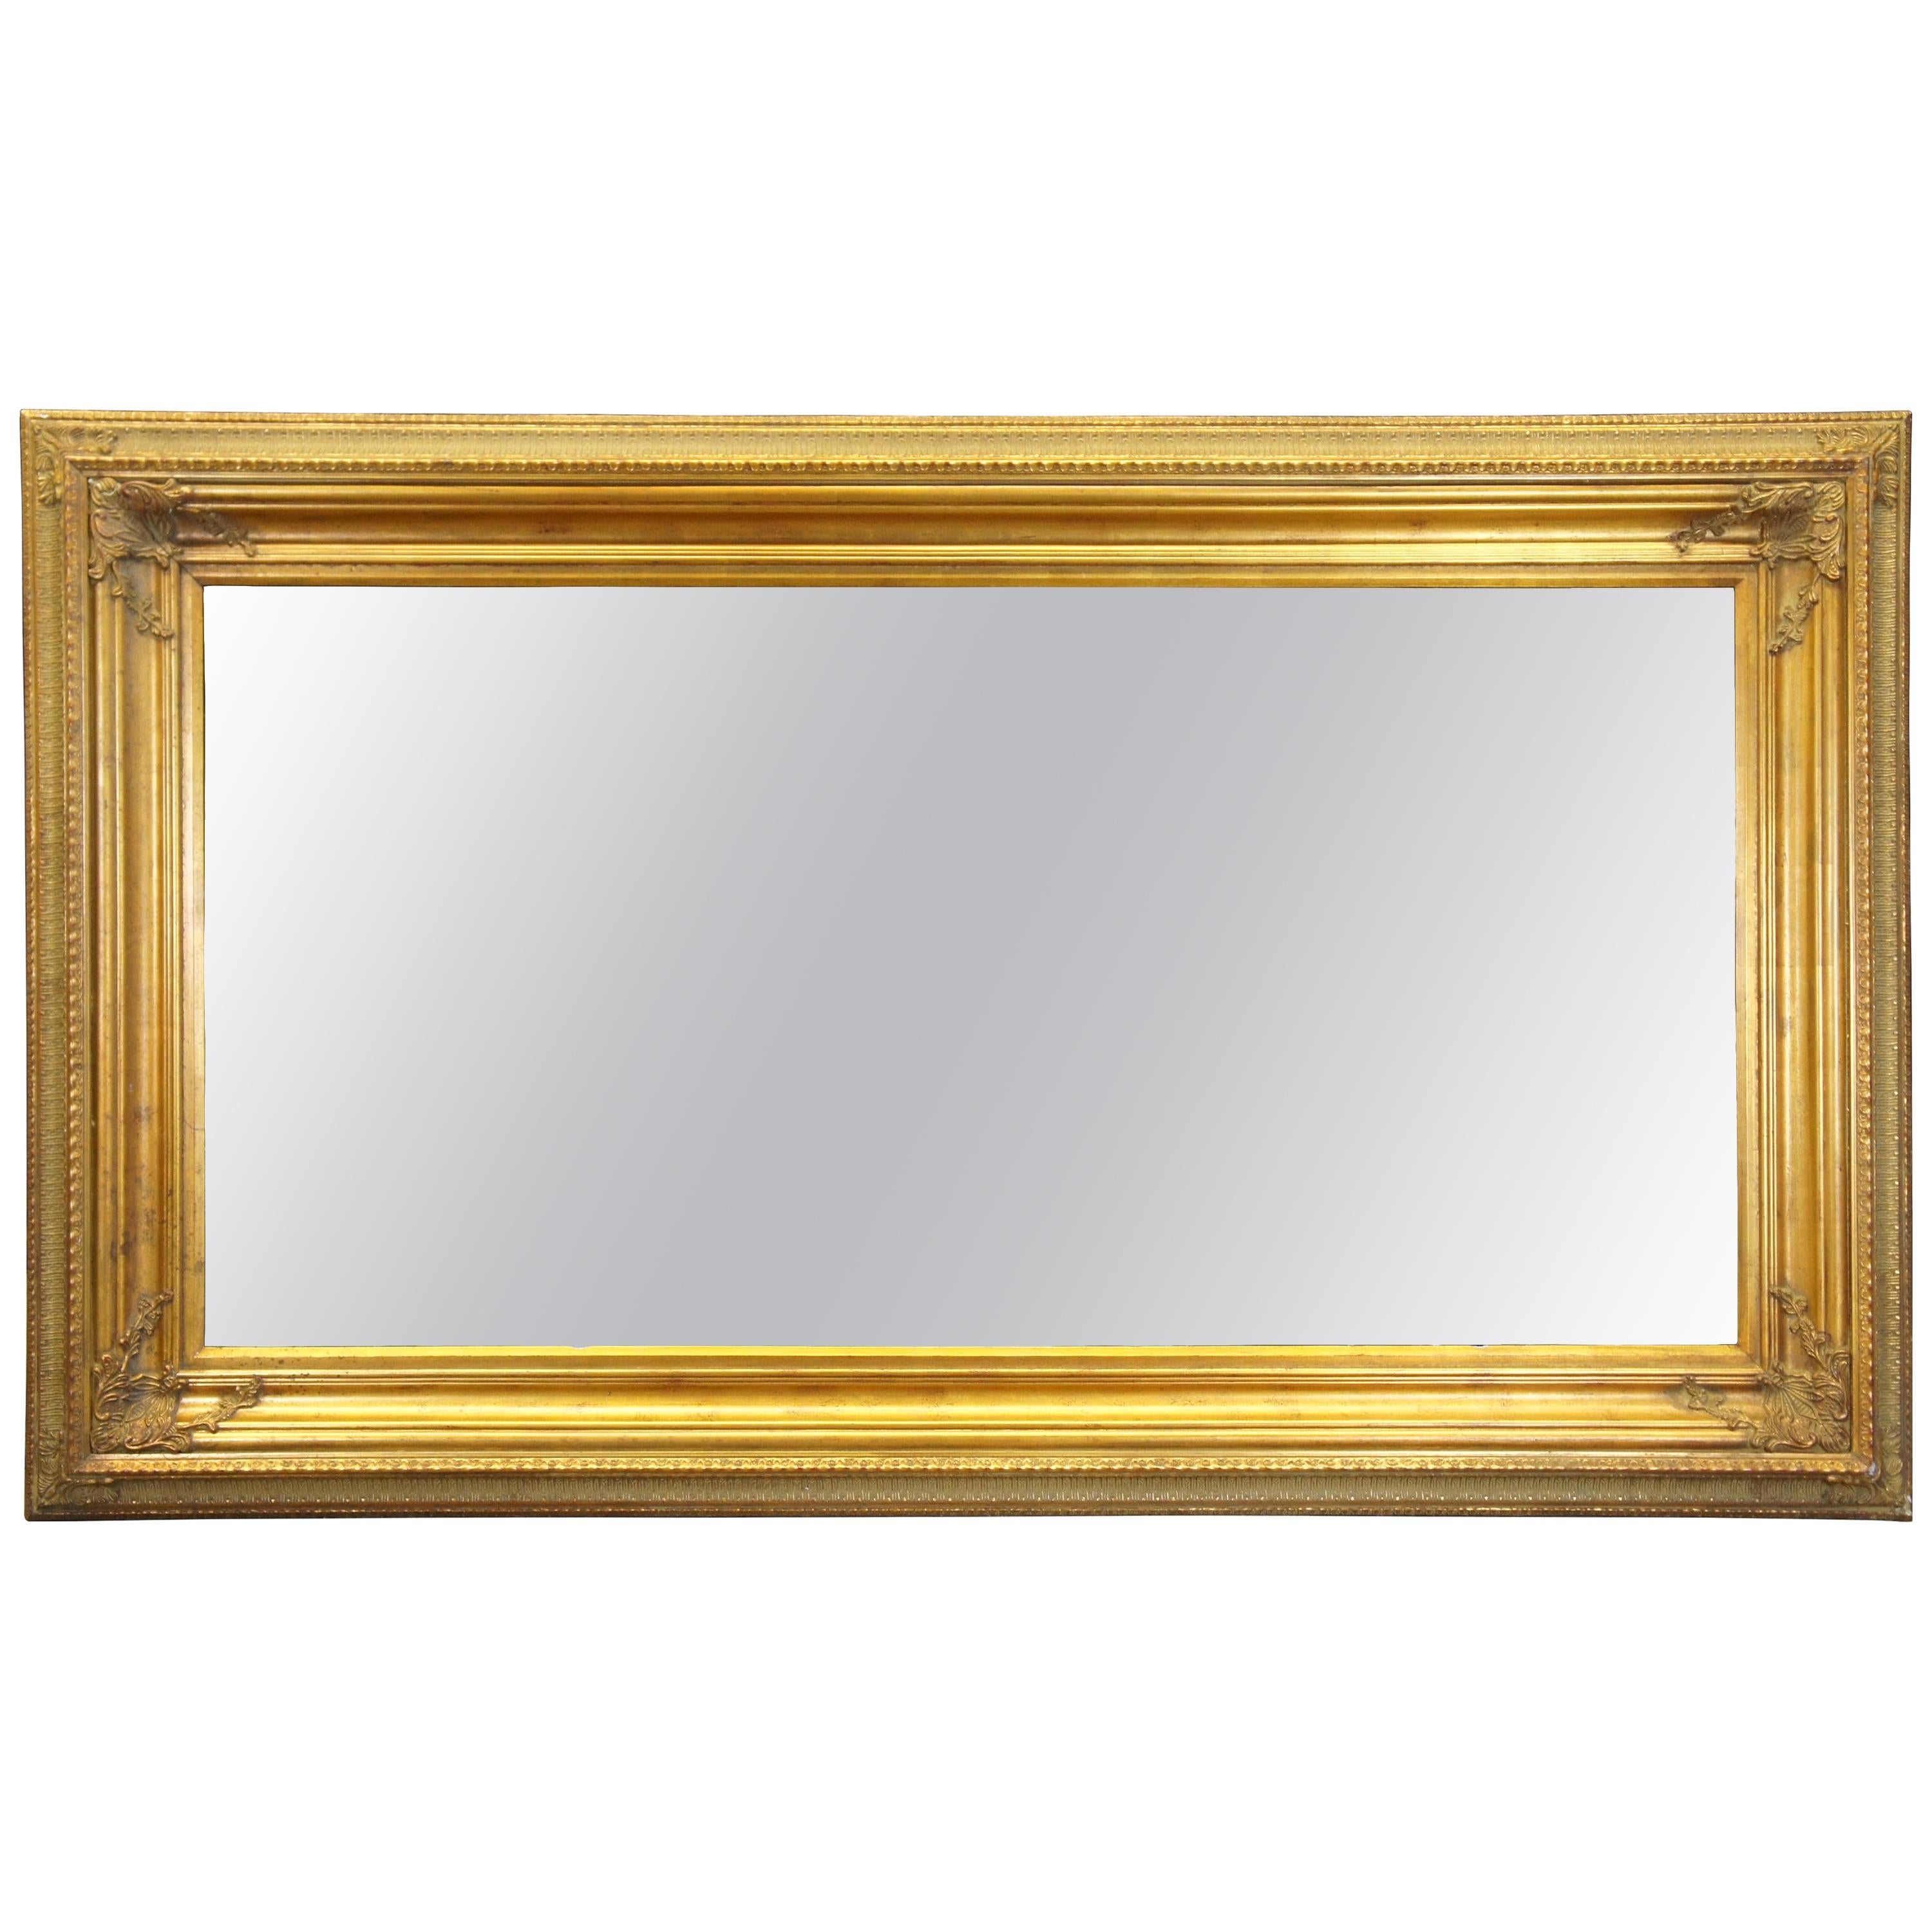 Monumental French Gold Wood Artwork or Mirror Frame Picture Floor Wall For Sale